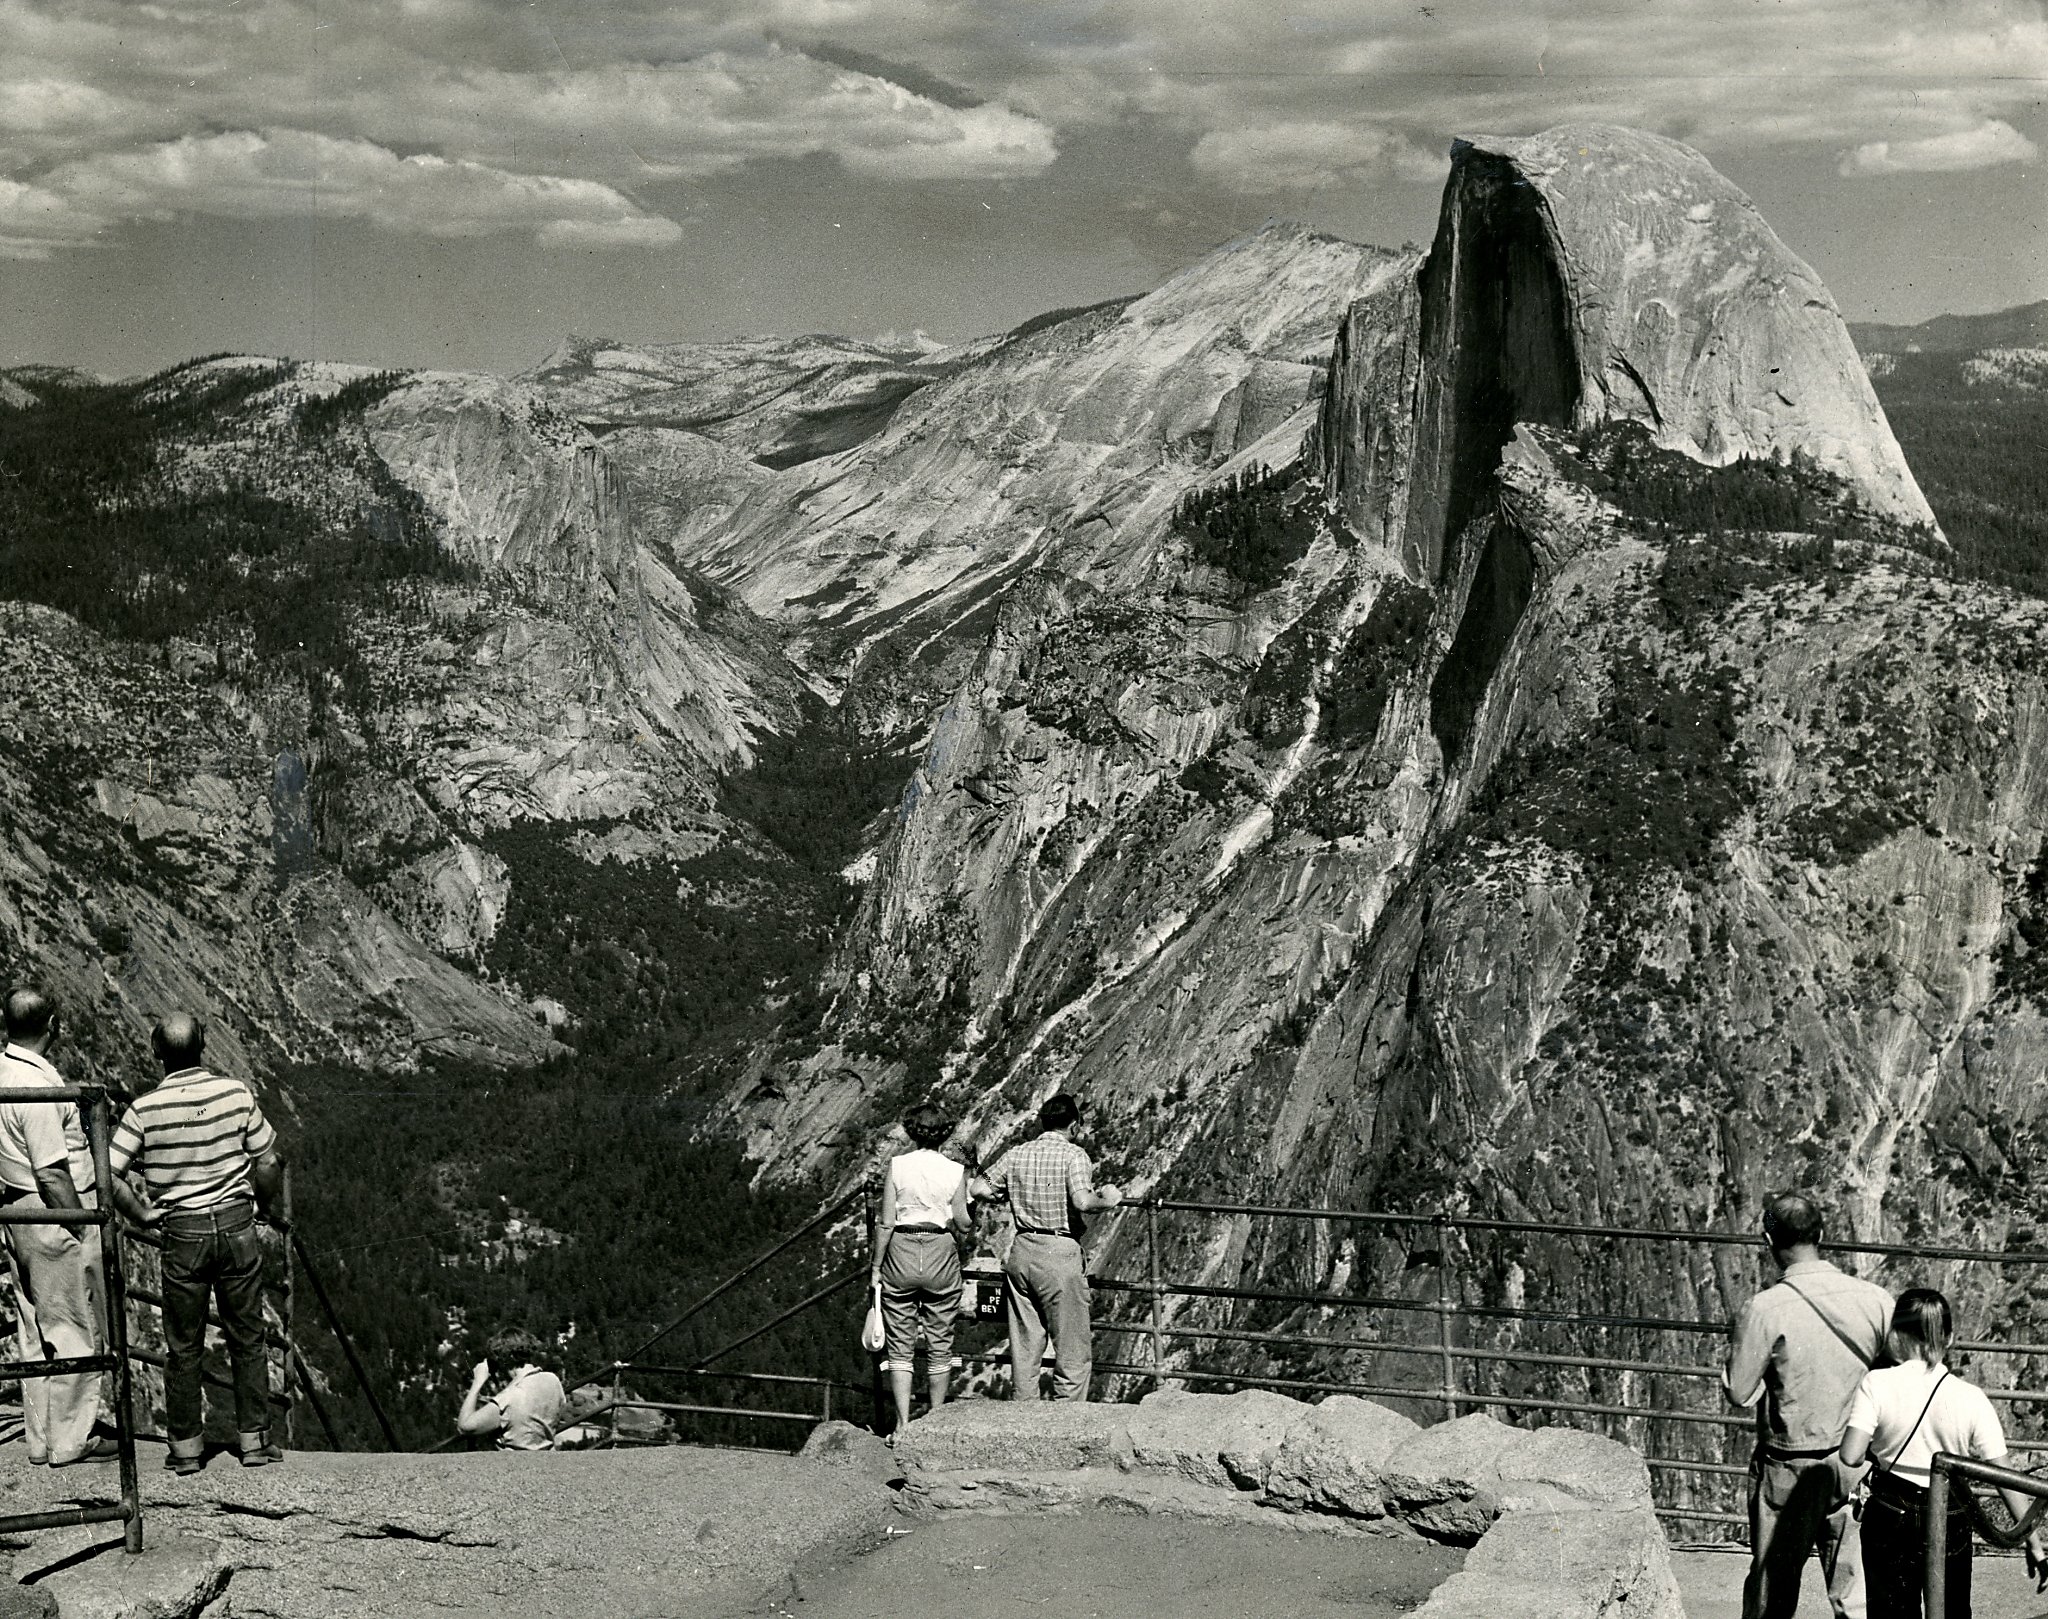 Yosemite National Park opens Glacier Point Road after long winter